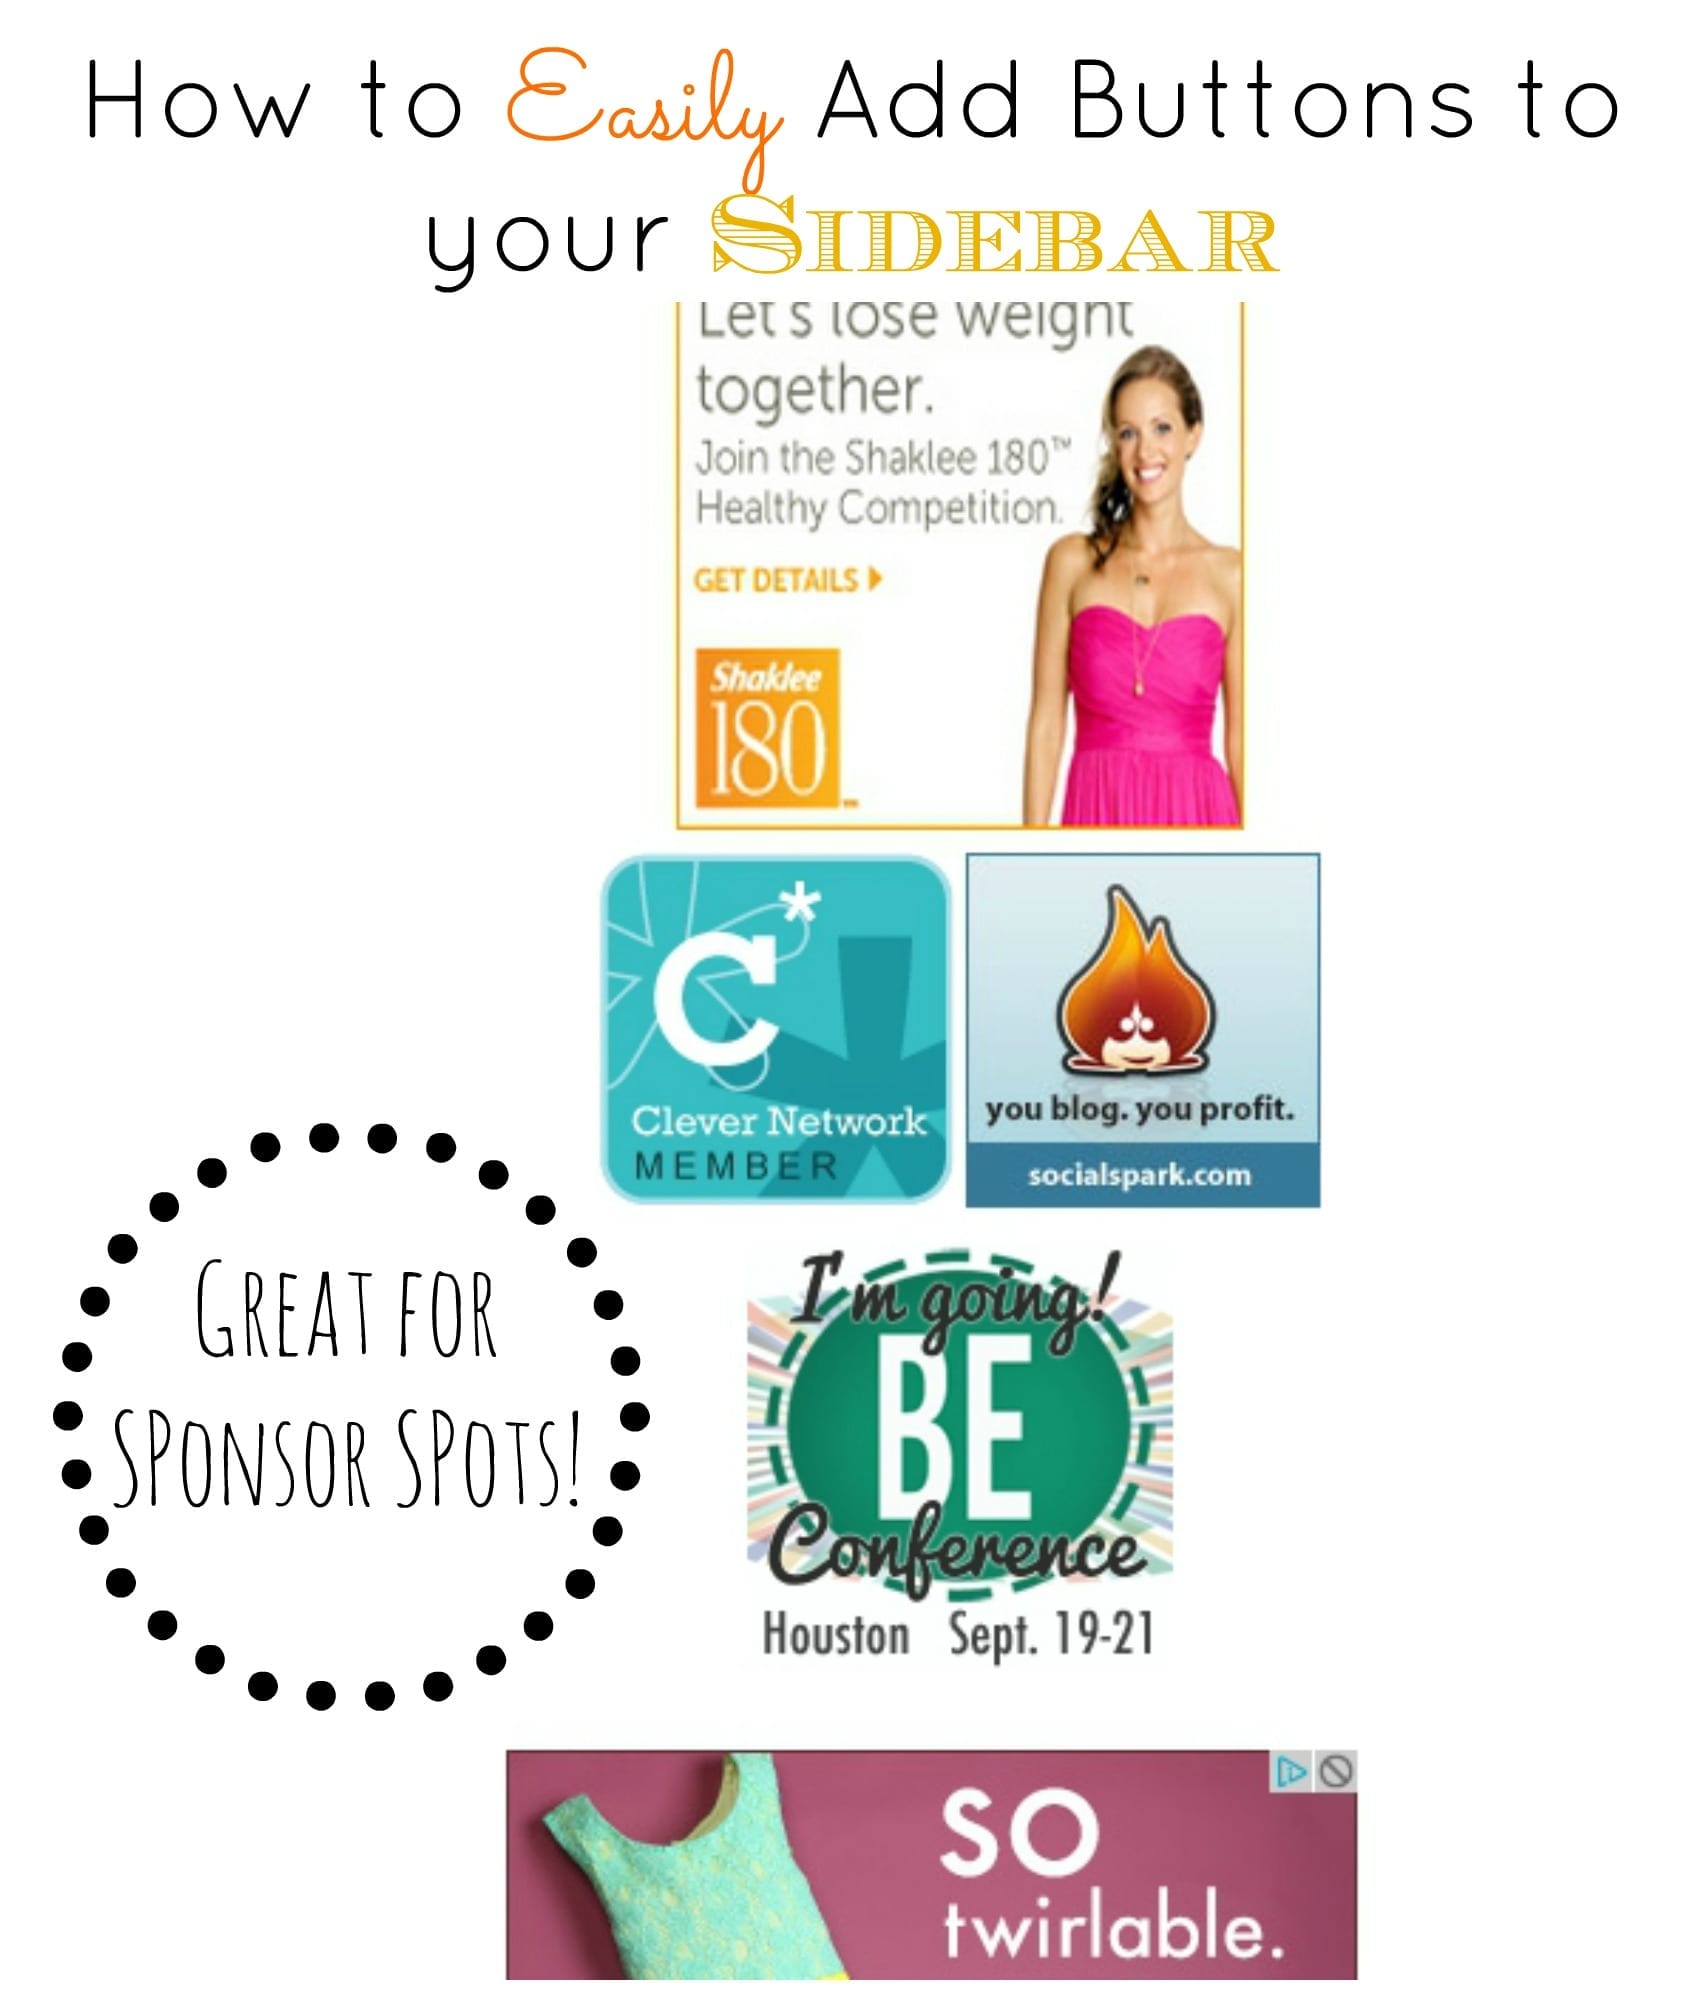 How to Add Buttons to your Sidebar